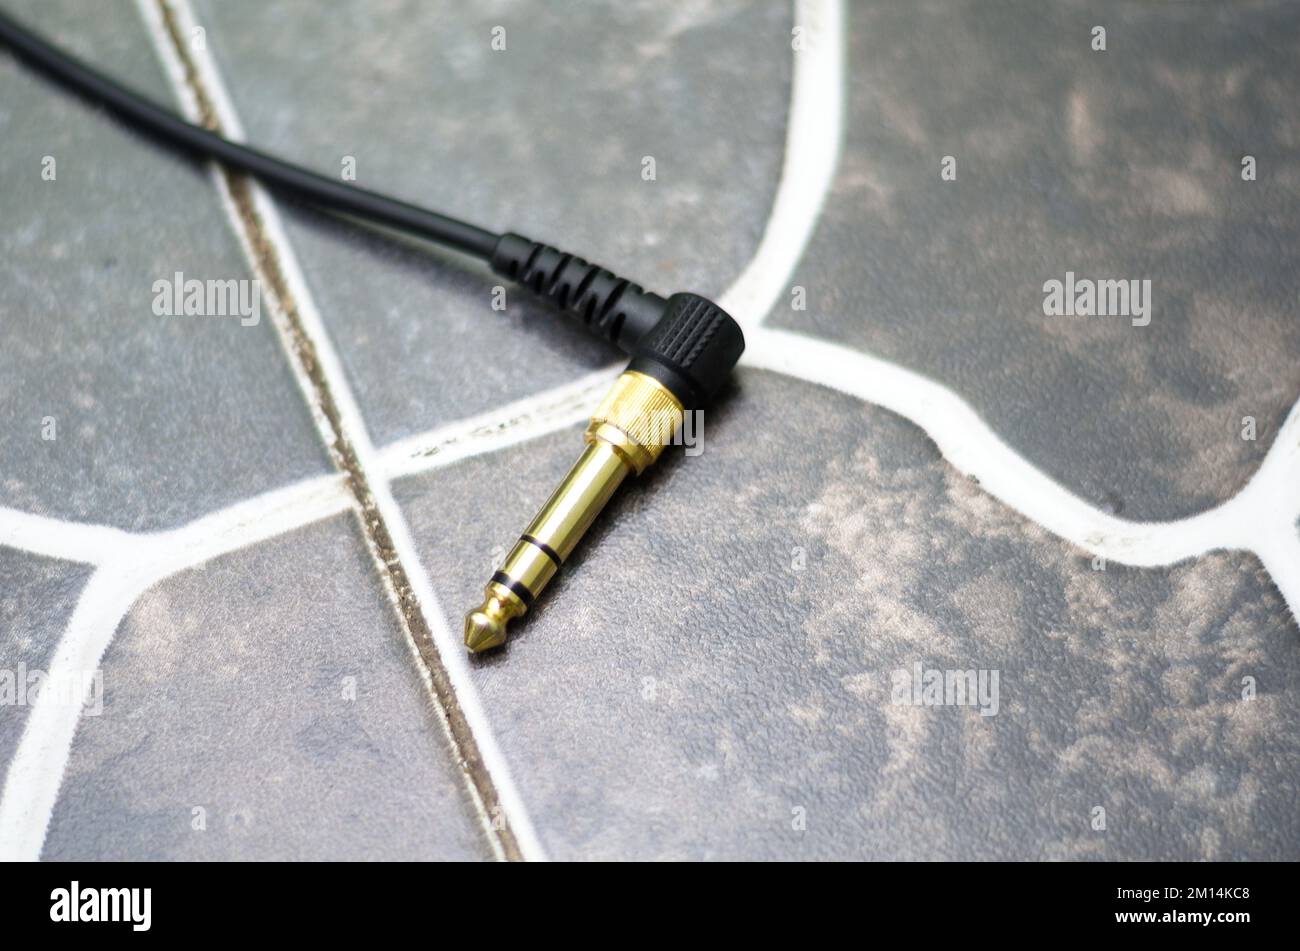 Close-up Shot Of 3.5mm Audio Jack Cable With 6.35mm Converter Attached Stock Photo